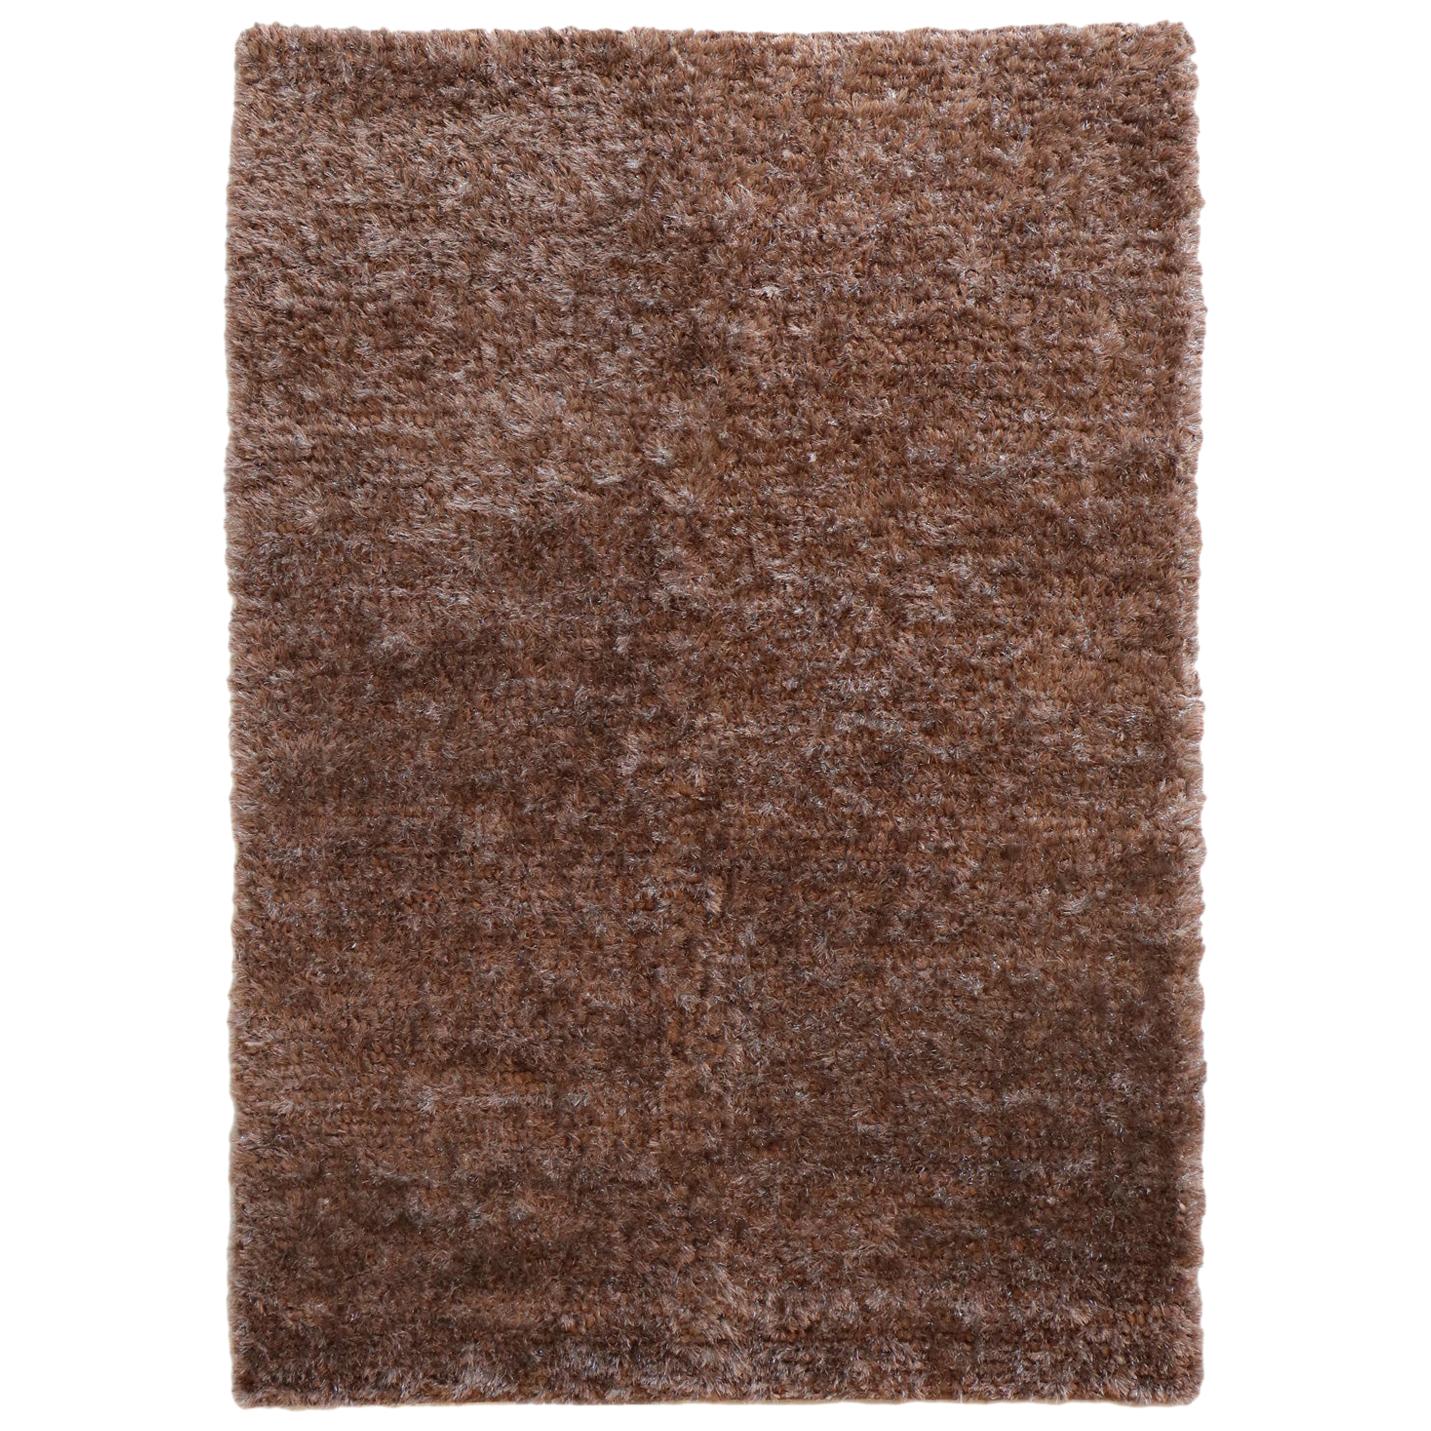 Nature Inspired Luminous Spring Brown Rug by Deanna Comellini In Stock 170x240cm